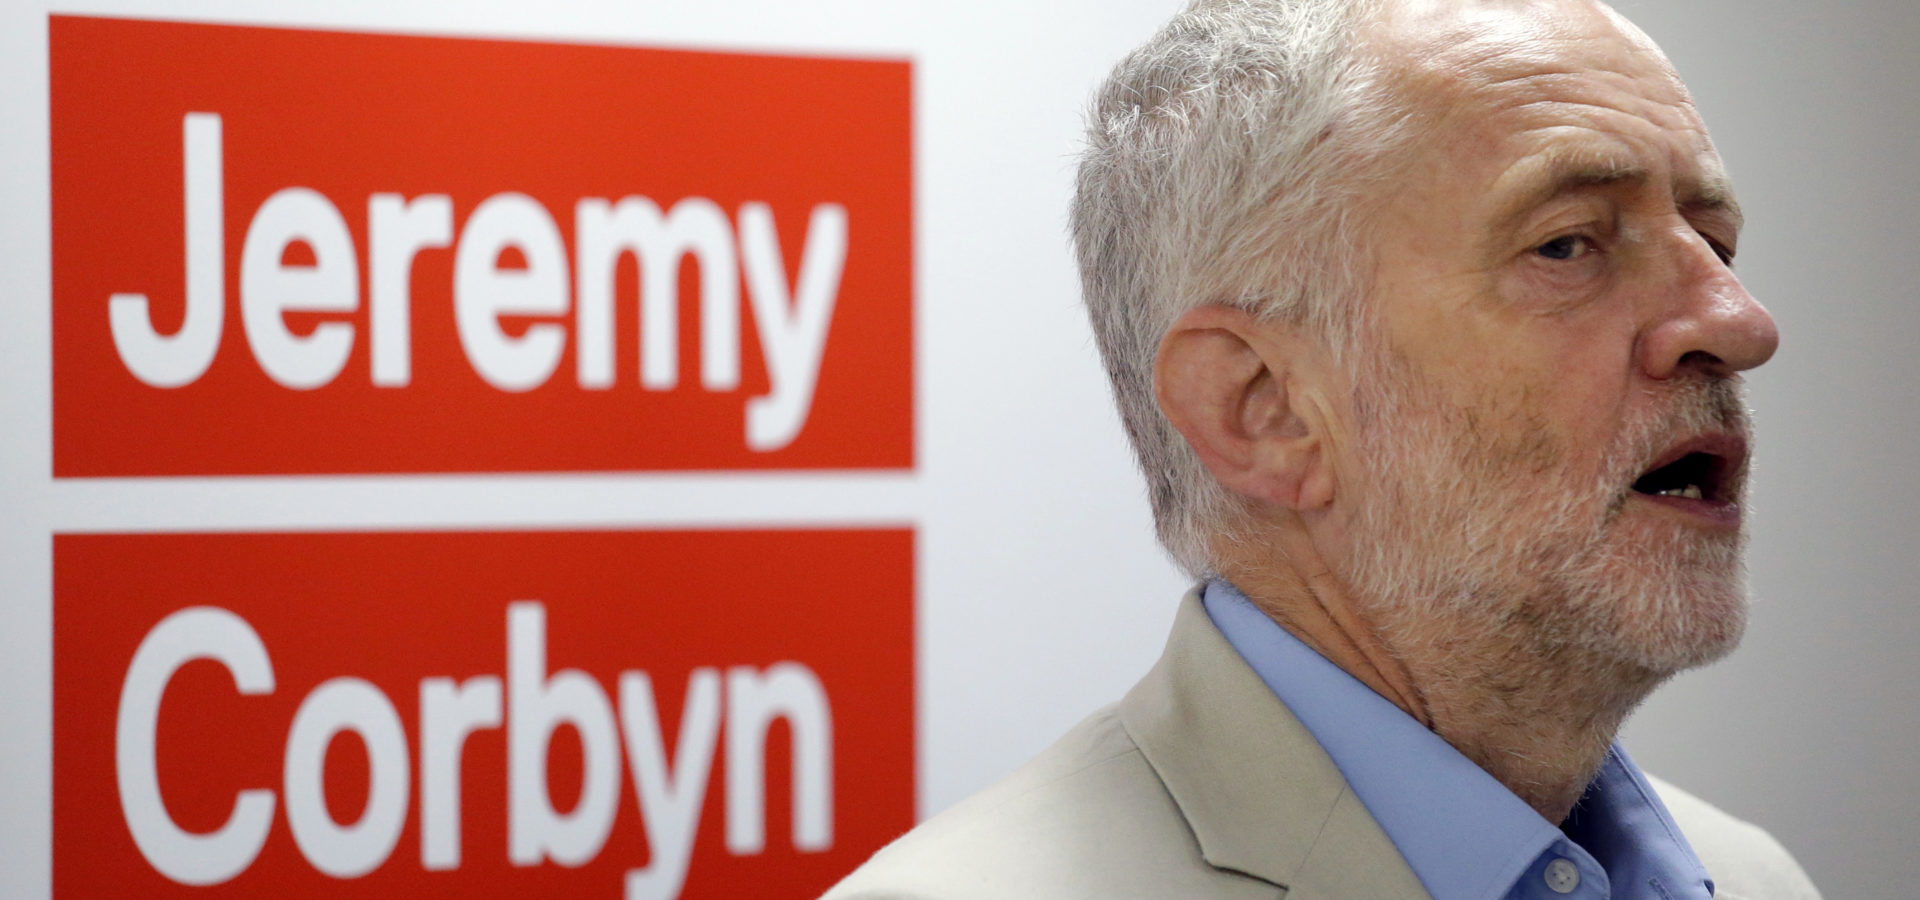 British Labour Party leader Jeremy Corbyn speaks to launch his bid to retain the leadership of the party, at the University College London Institute of Education in London, Thursday, July 21, 2016. (AP/Matt Dunham)